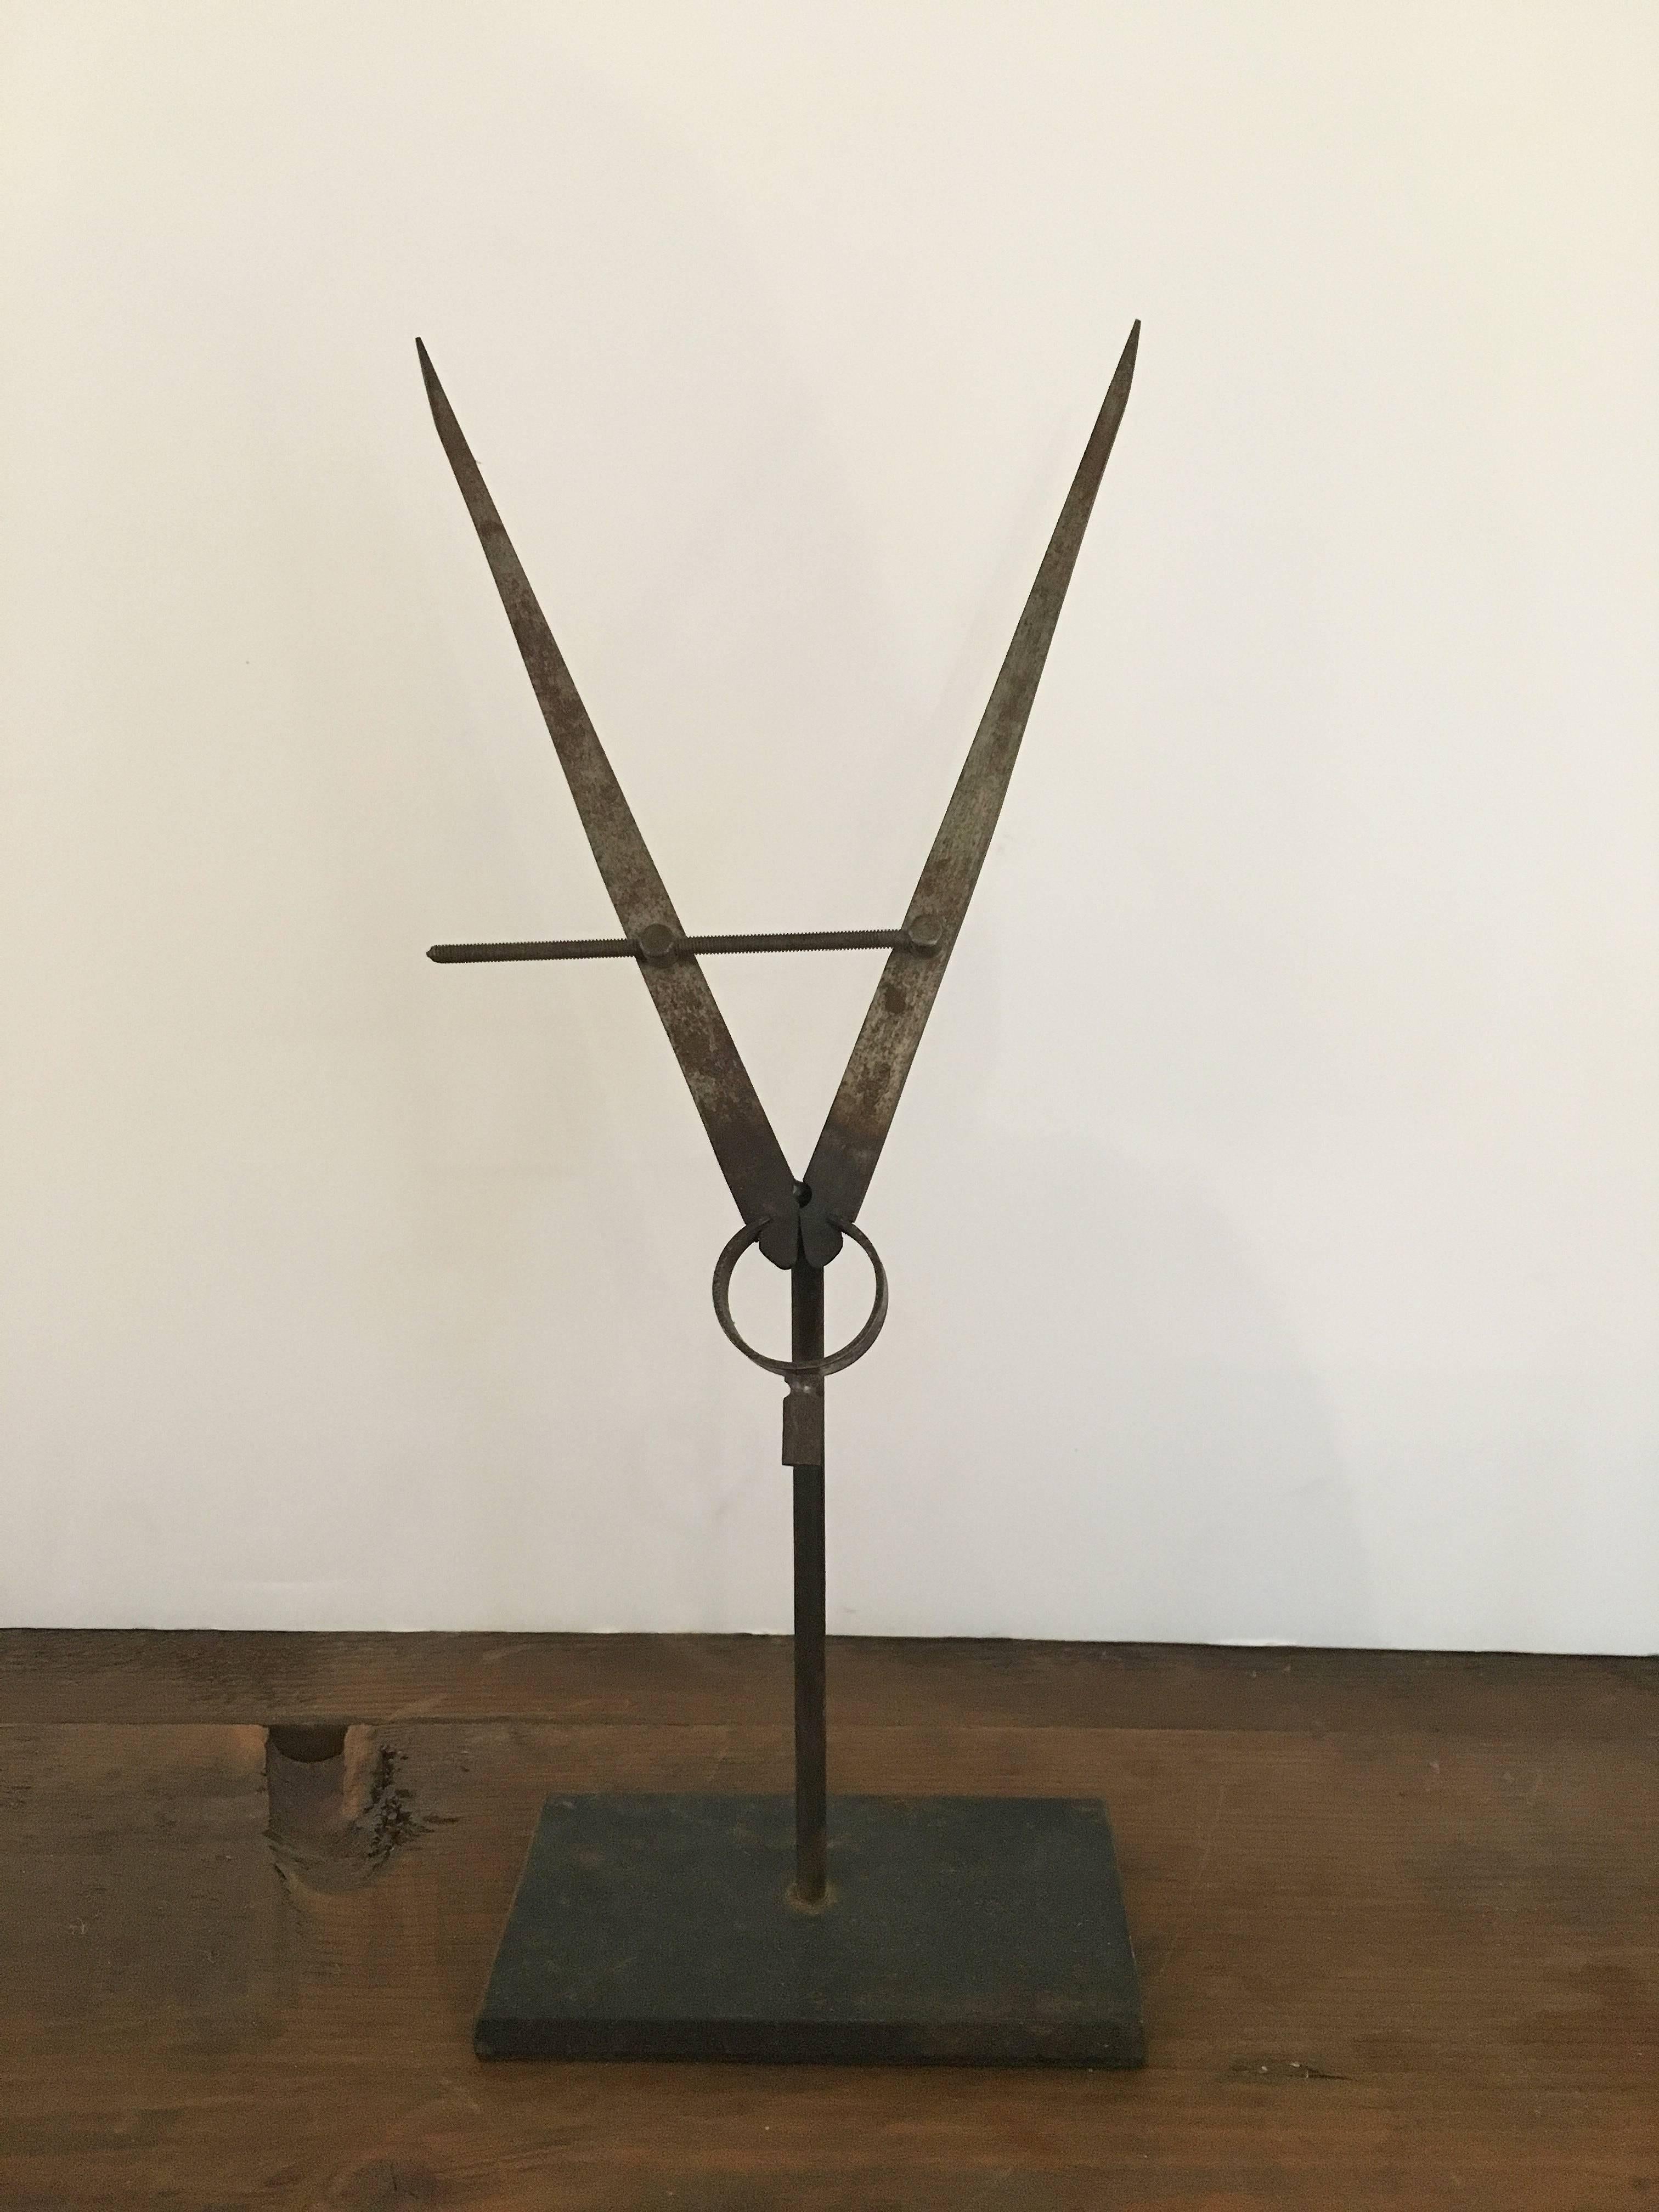 Mounted vintage drafting compass. 

Historical drafting tool welded to steel base, for presentation as sculpture, in library, work shop, or cabinet of curiosity.